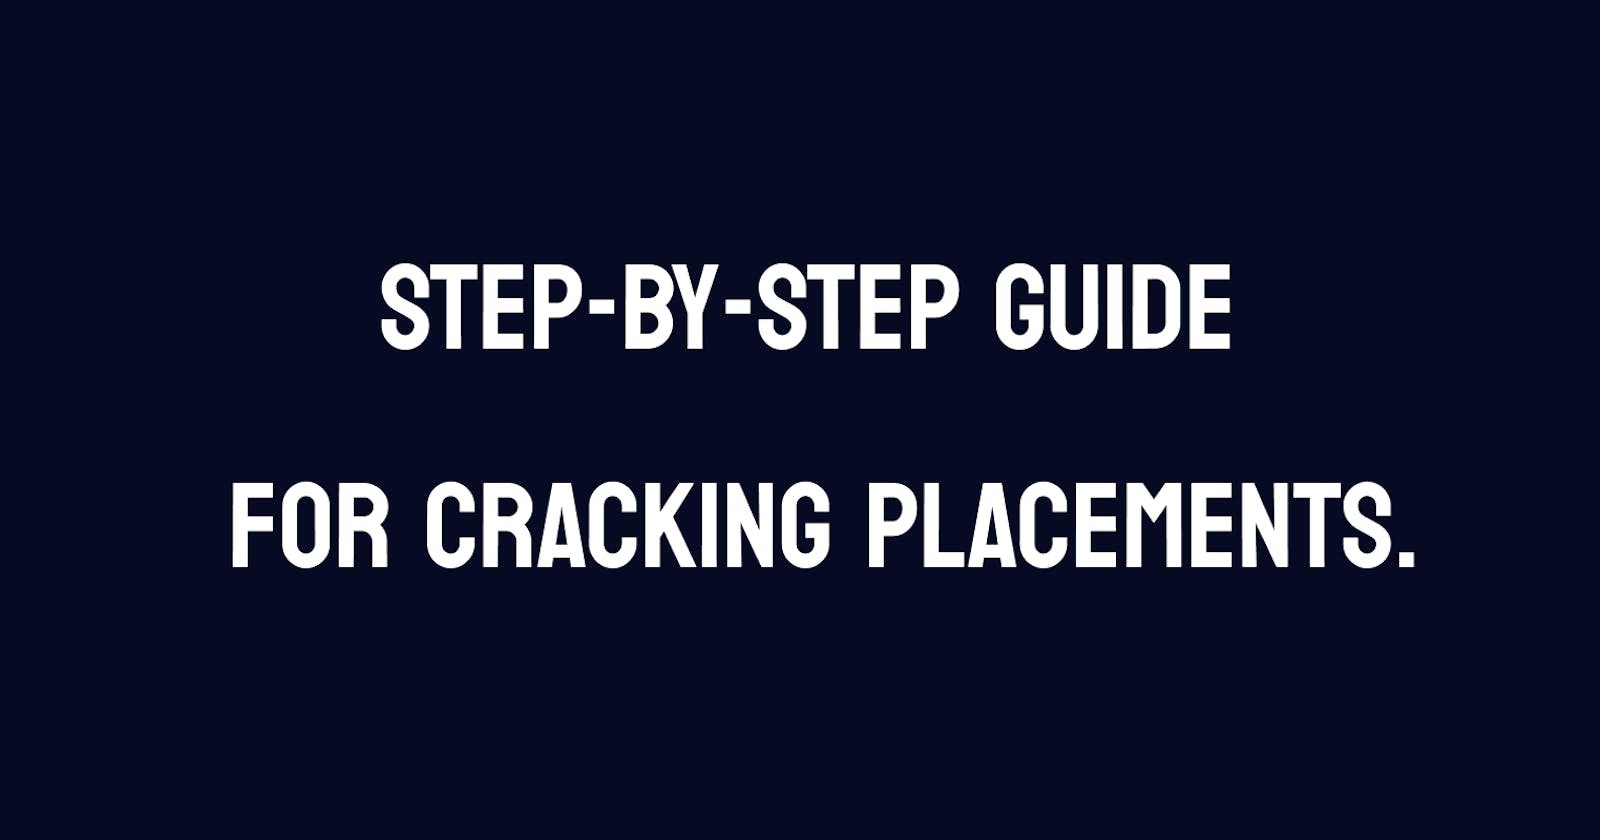 Cracking Placements:  The Journey through Processes and Components